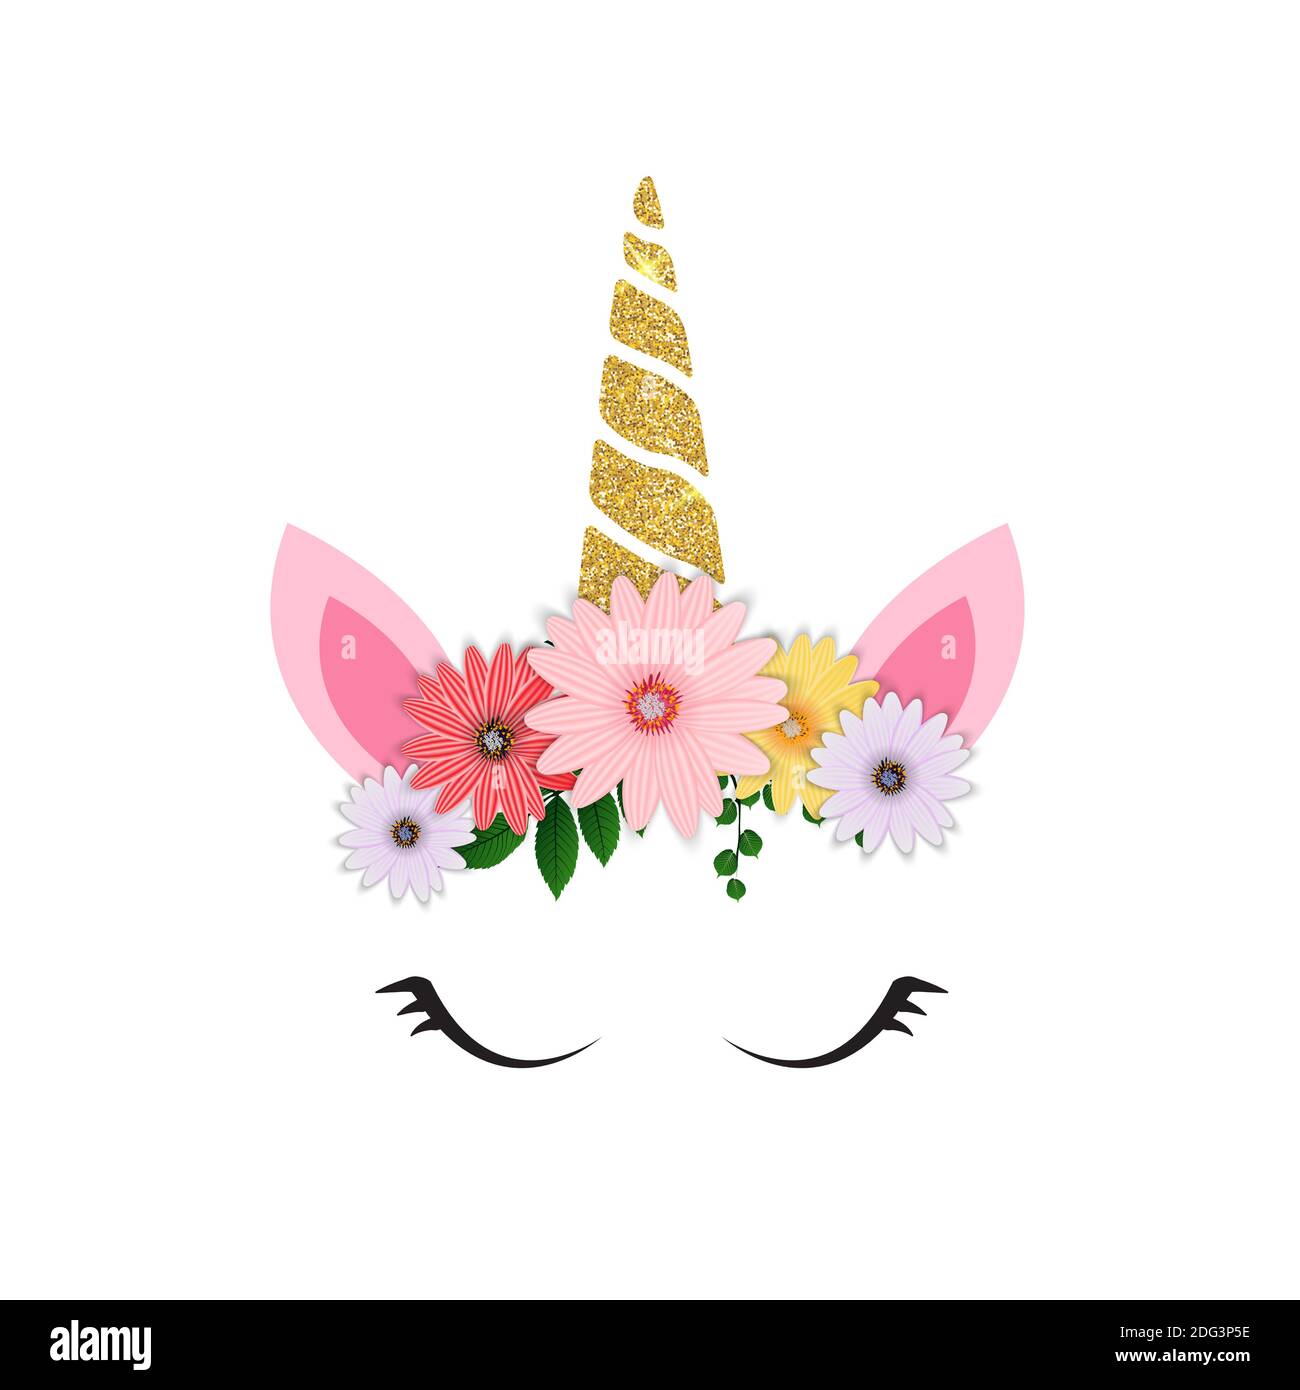 Cute unicorn head and eyes with flower. Illustration Stock Photo - Alamy